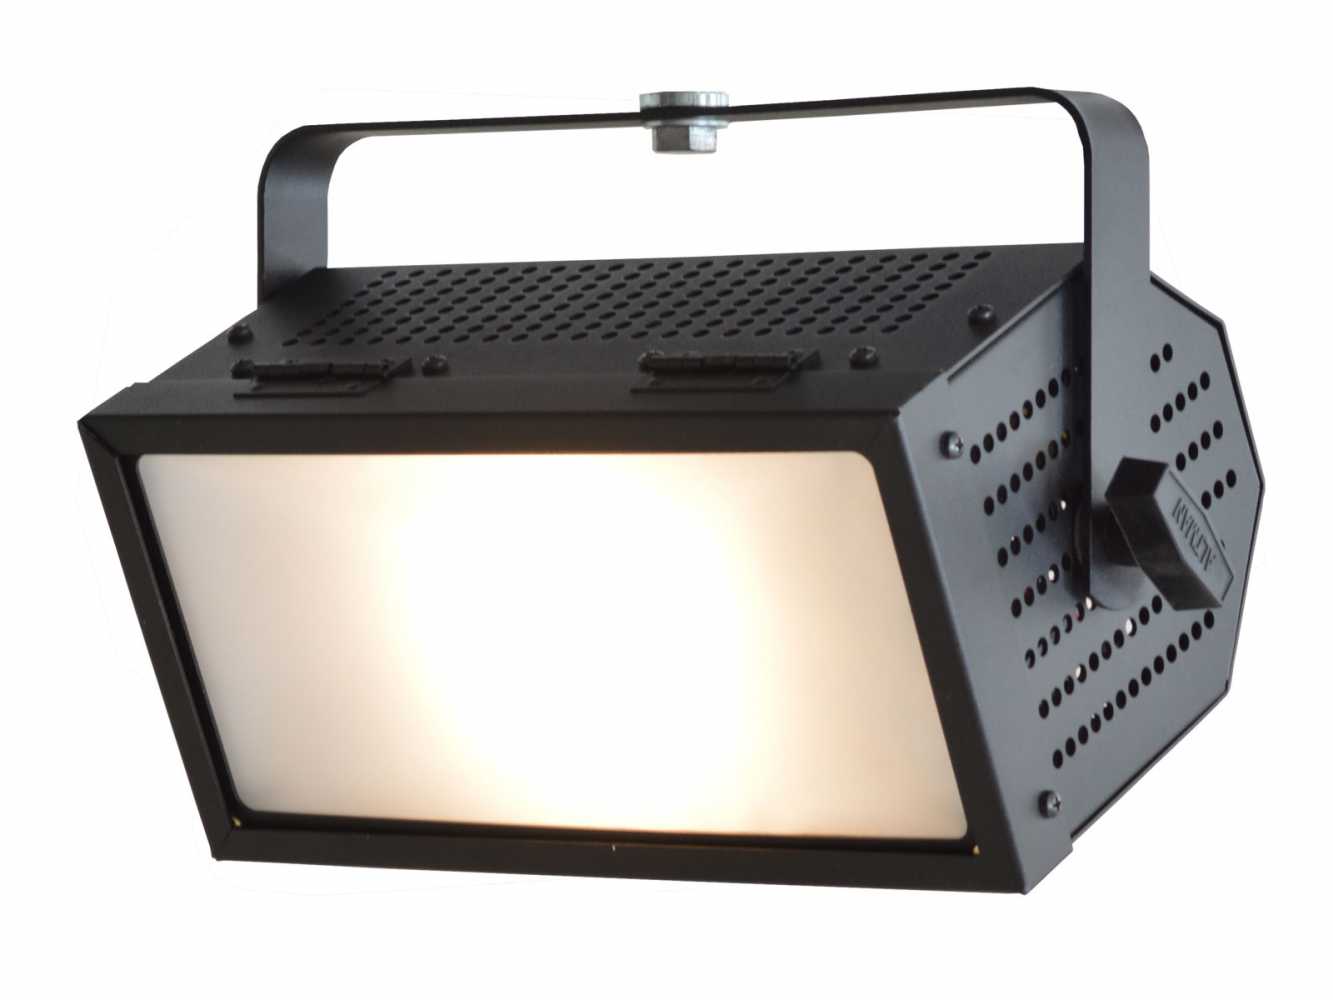 The LED Work Light II is outfitted with onboard dimming for local control